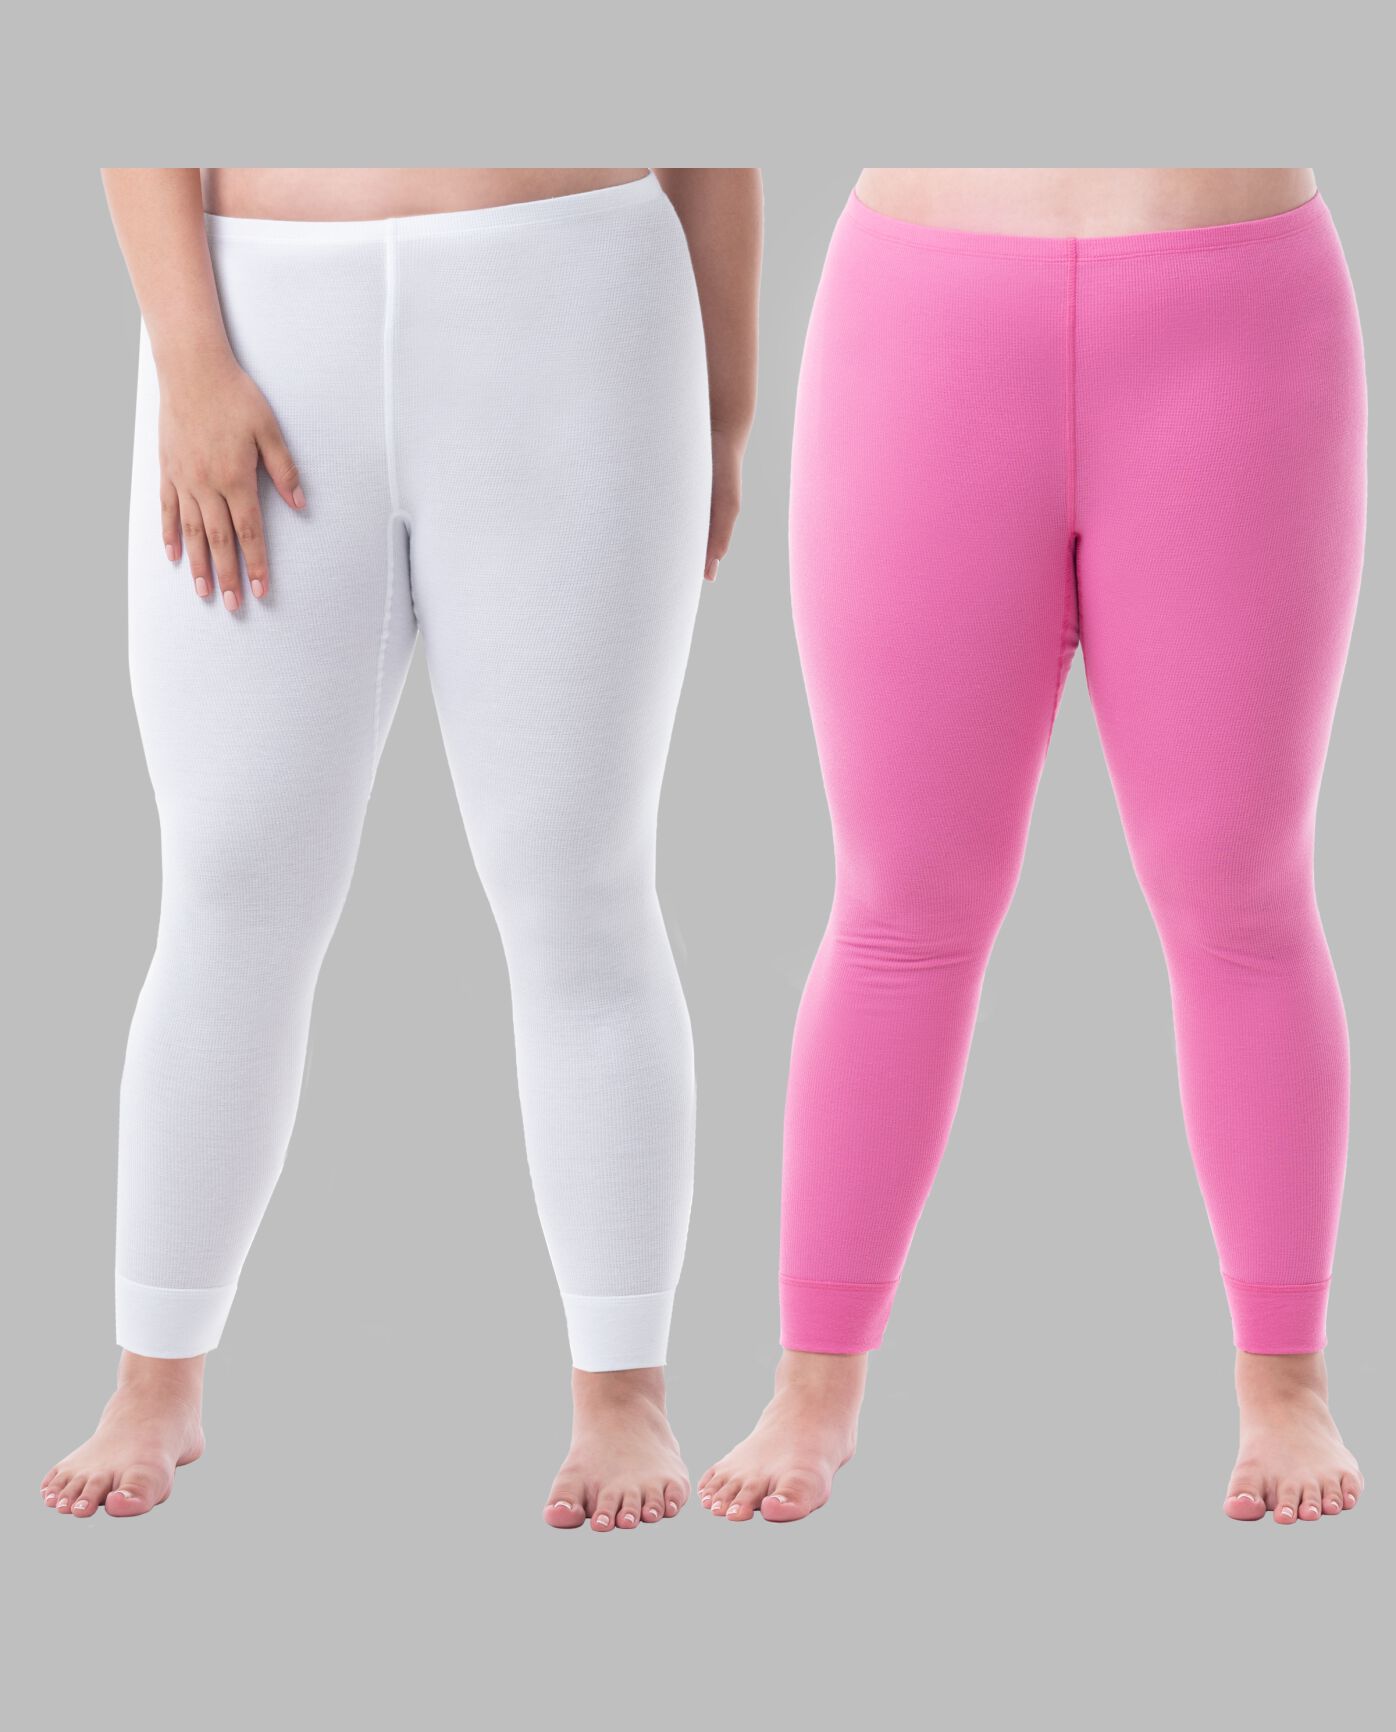 Women's Plus Size Thermal Bottom, 2 Pack PINK BERRY/WHITE